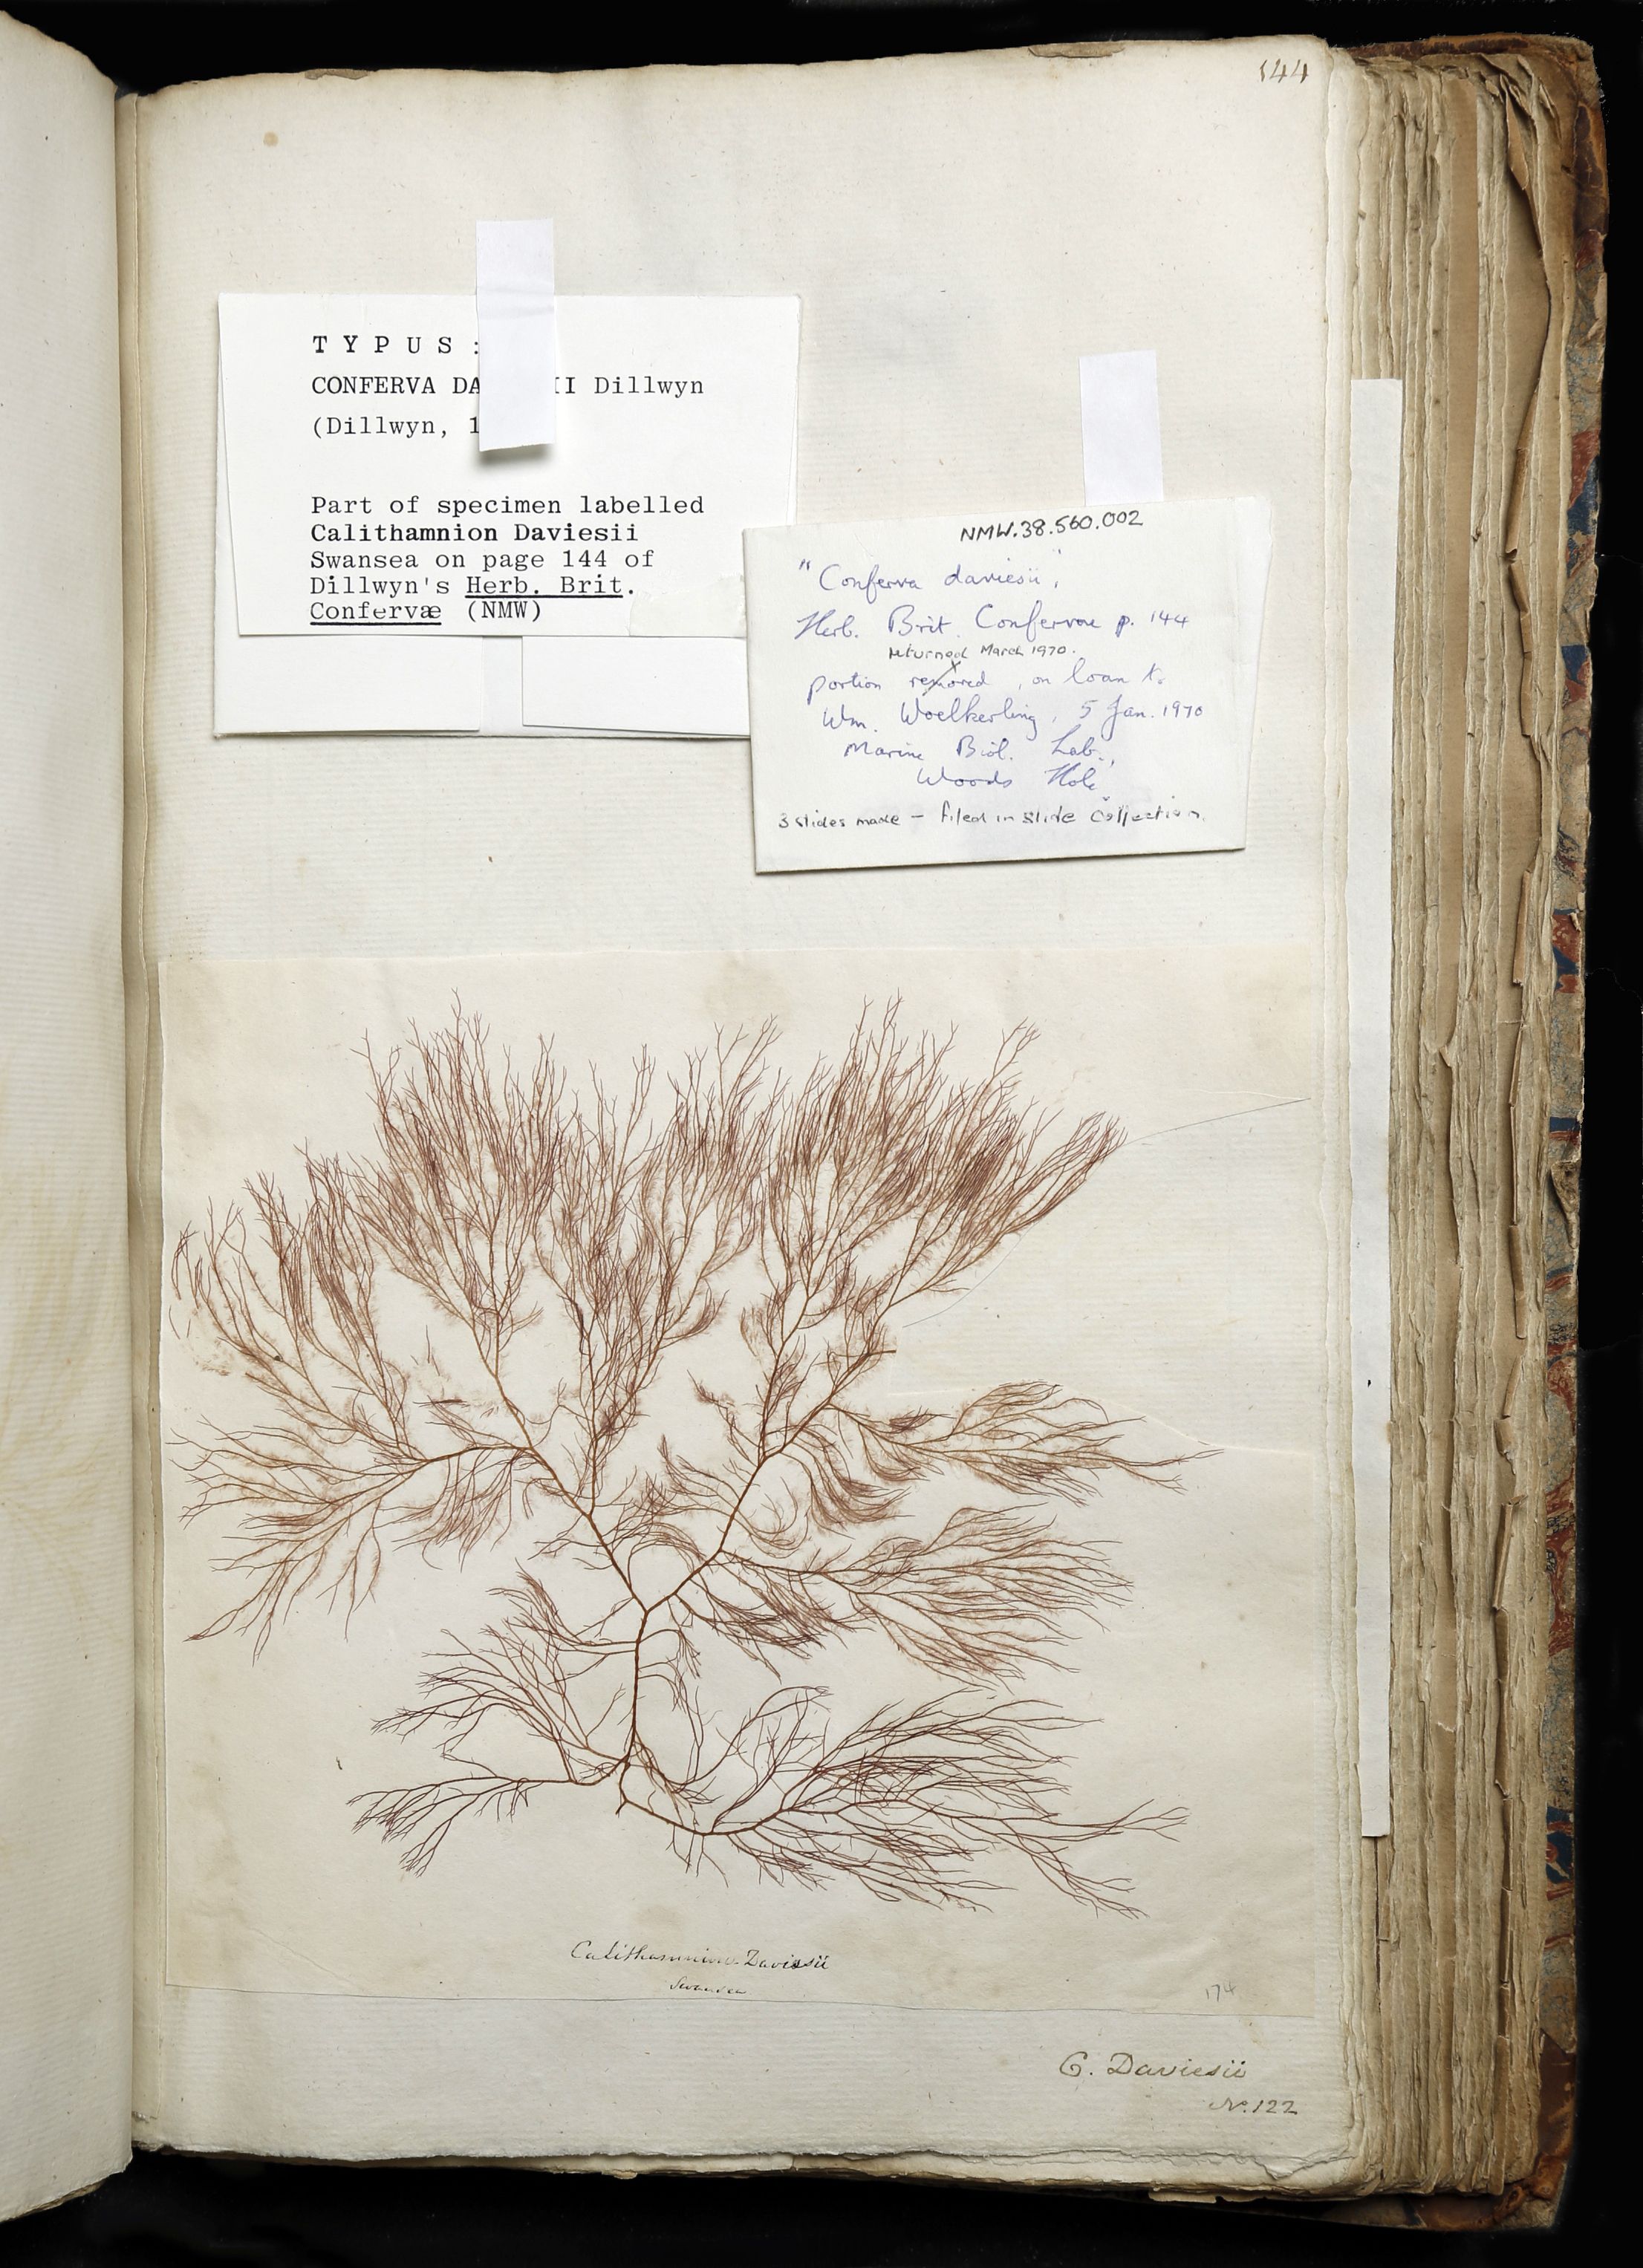 Lewis Weston Dillwyn's ‘Herbarium of the British Confervae’ book of pressed seaweeds and freshwater algae from south Wales from the early 1800s